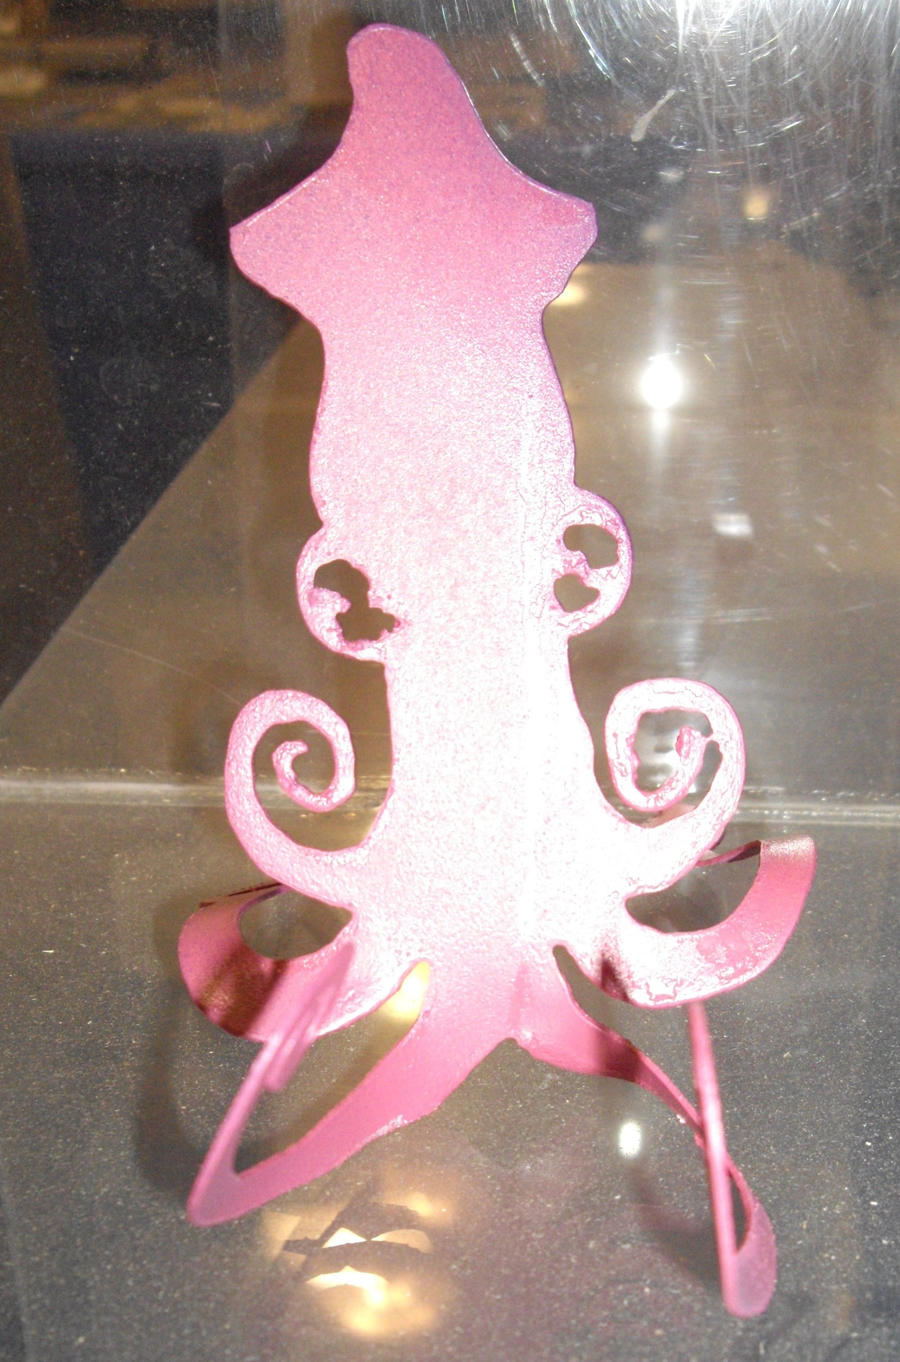 squid business card holder 2